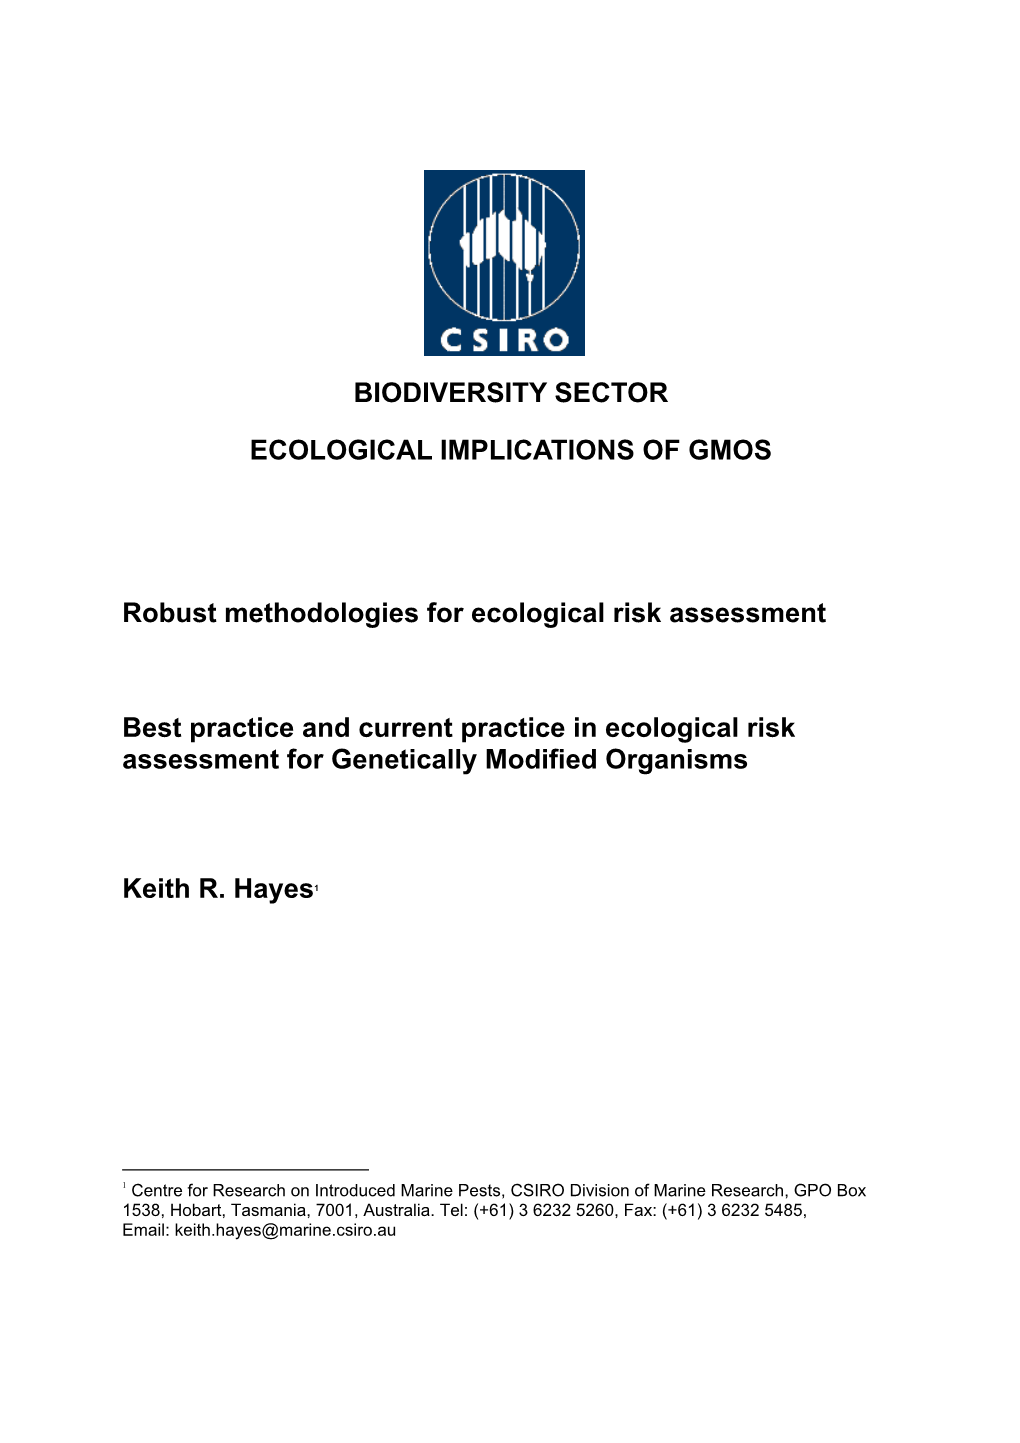 Best Practice and Current Practice in Ecological Risk Assessment for Genetically Modified Organisms